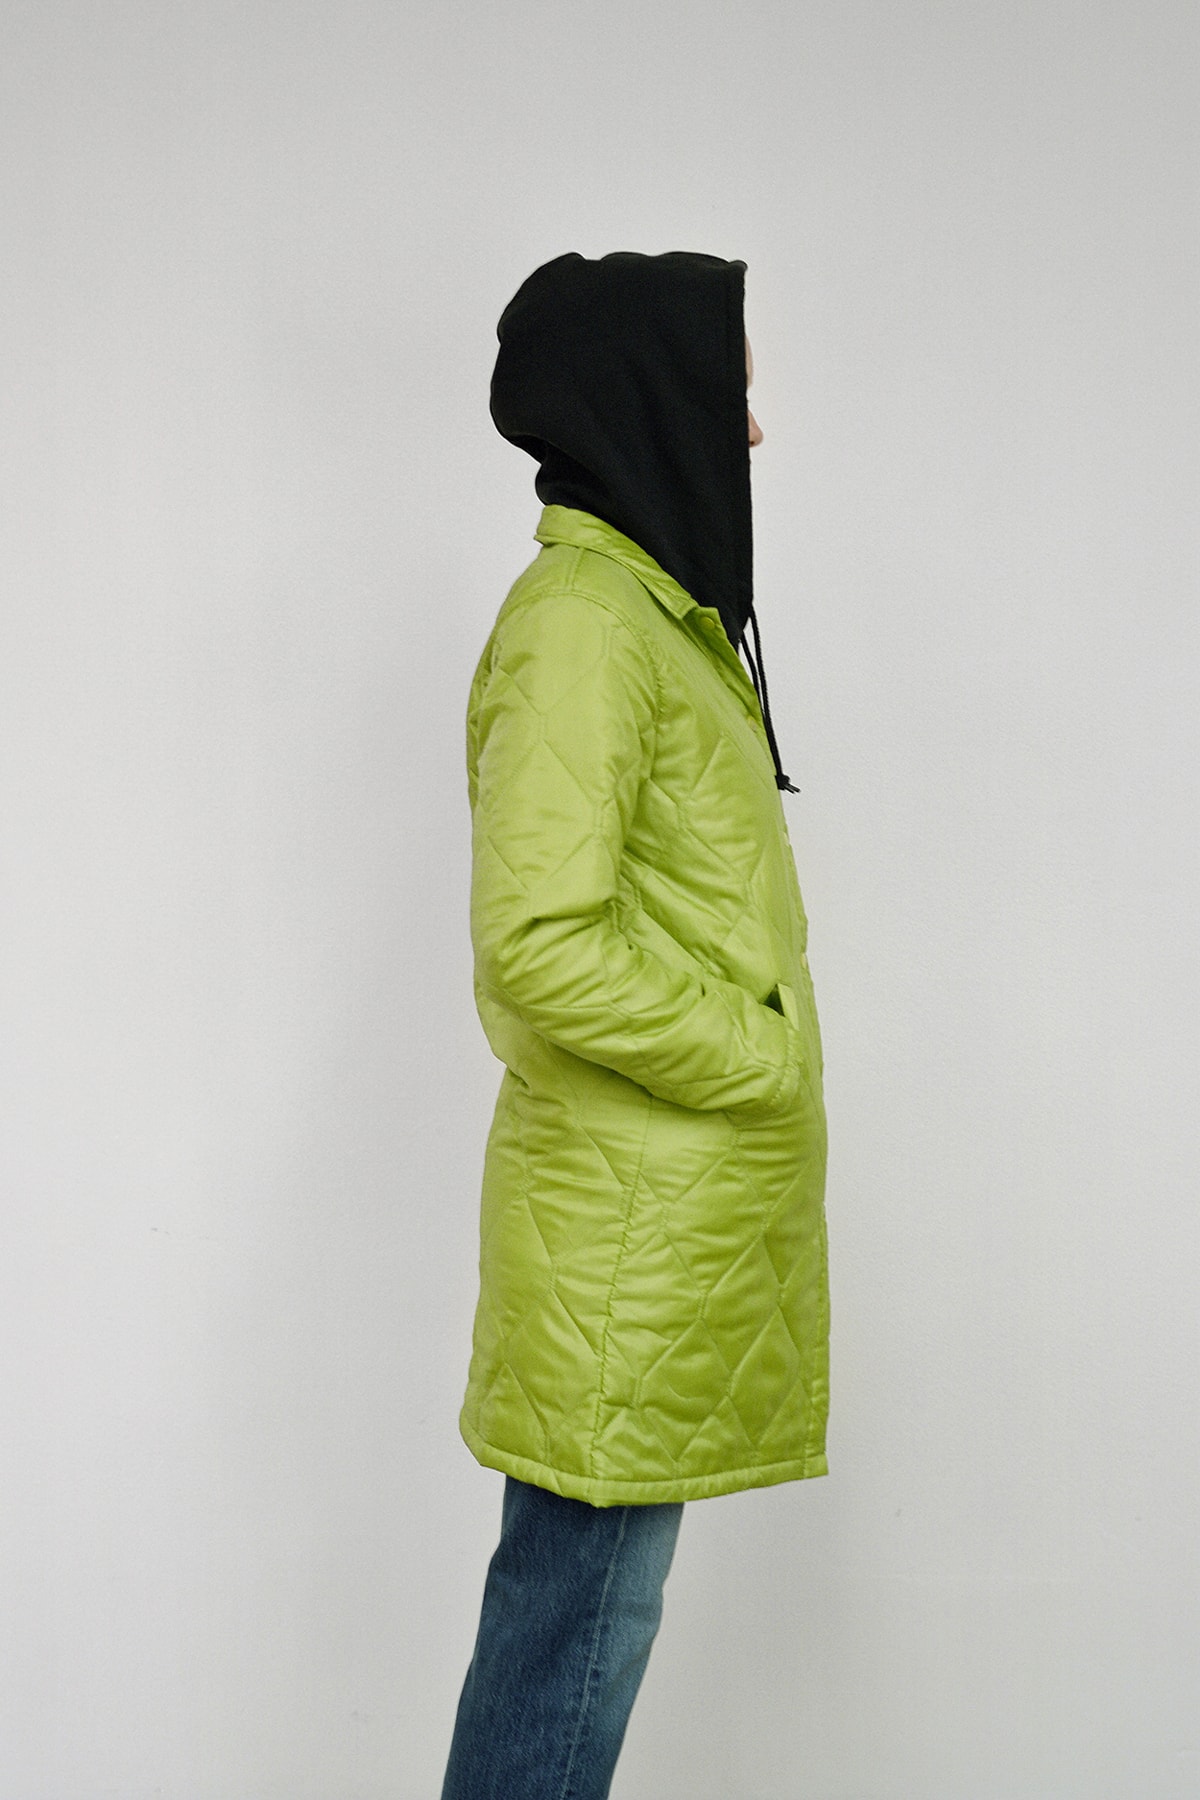 Stussy Women's Holiday 2018 Collection Lookbook Jacket Bright Green